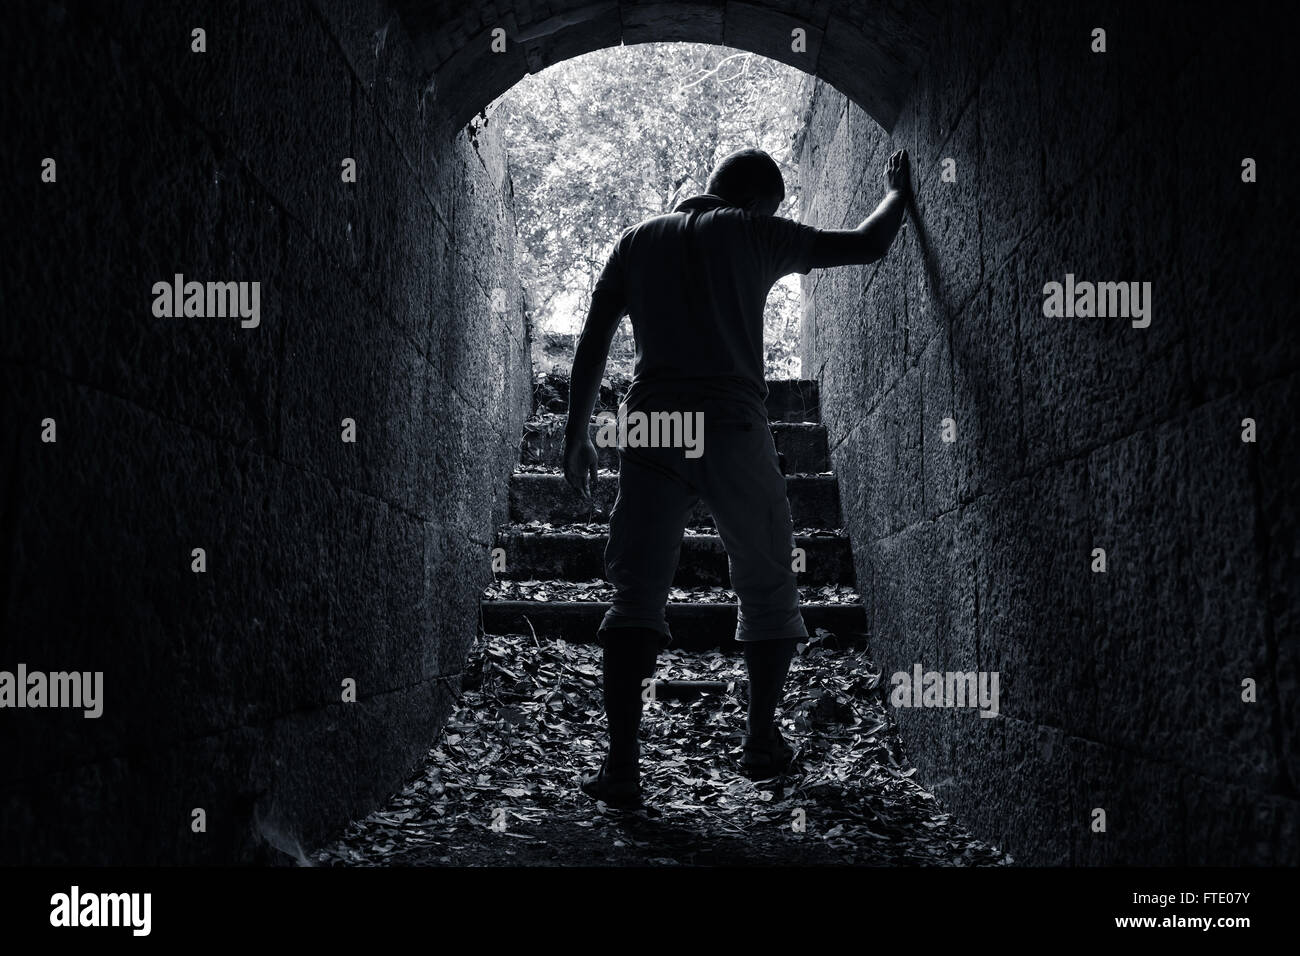 Young tired man leaves dark stone tunnel with glowing end, dark blue monochrome photo Stock Photo